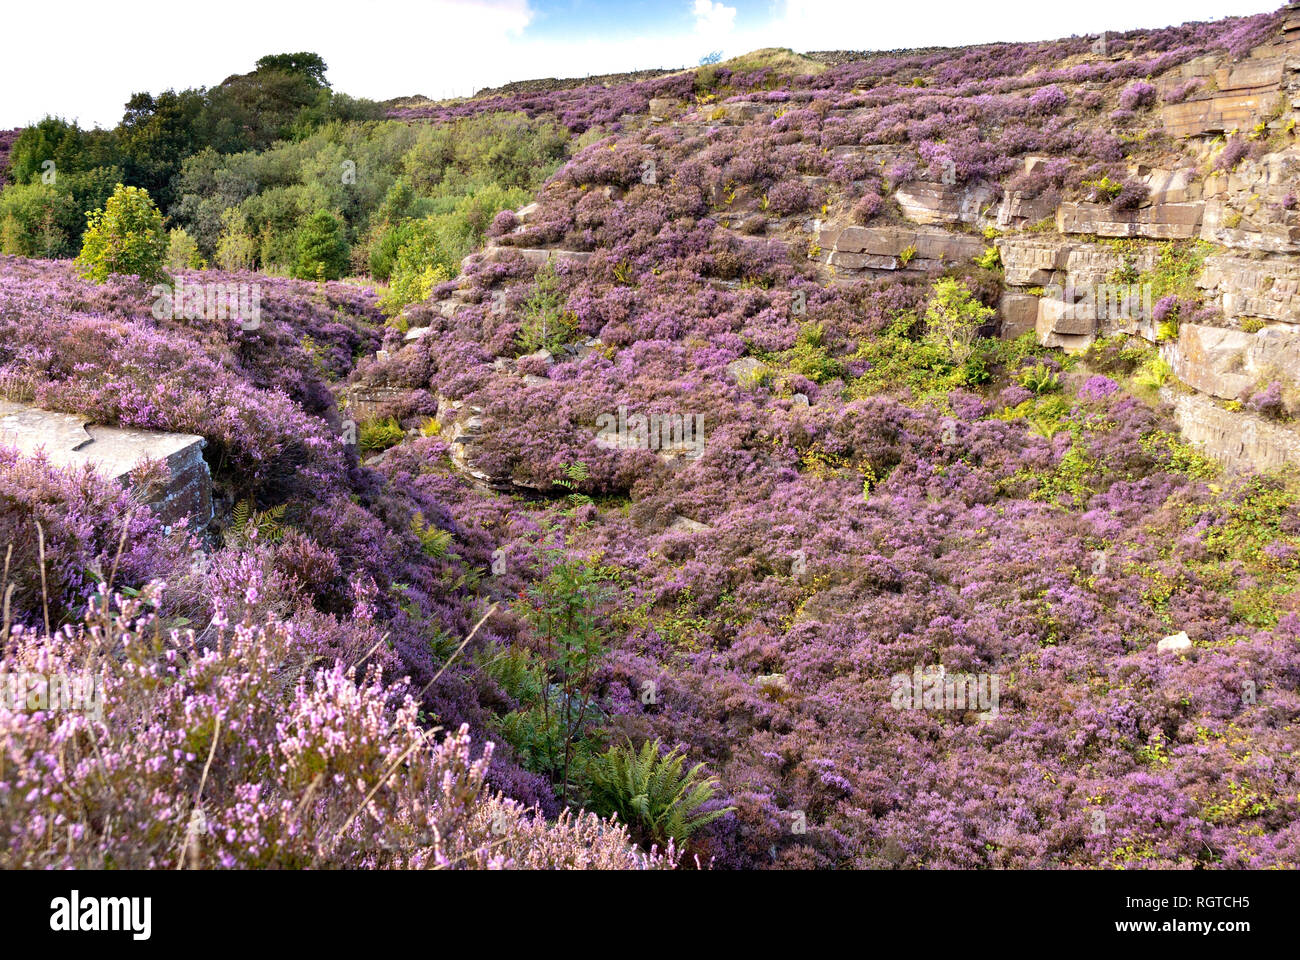 Yorkshire, UK Aug 31: Overlooking an old quarry turned pink with heather in flower on 31 Aug 2014 at Digley Reservoir, Holmeforth Stock Photo